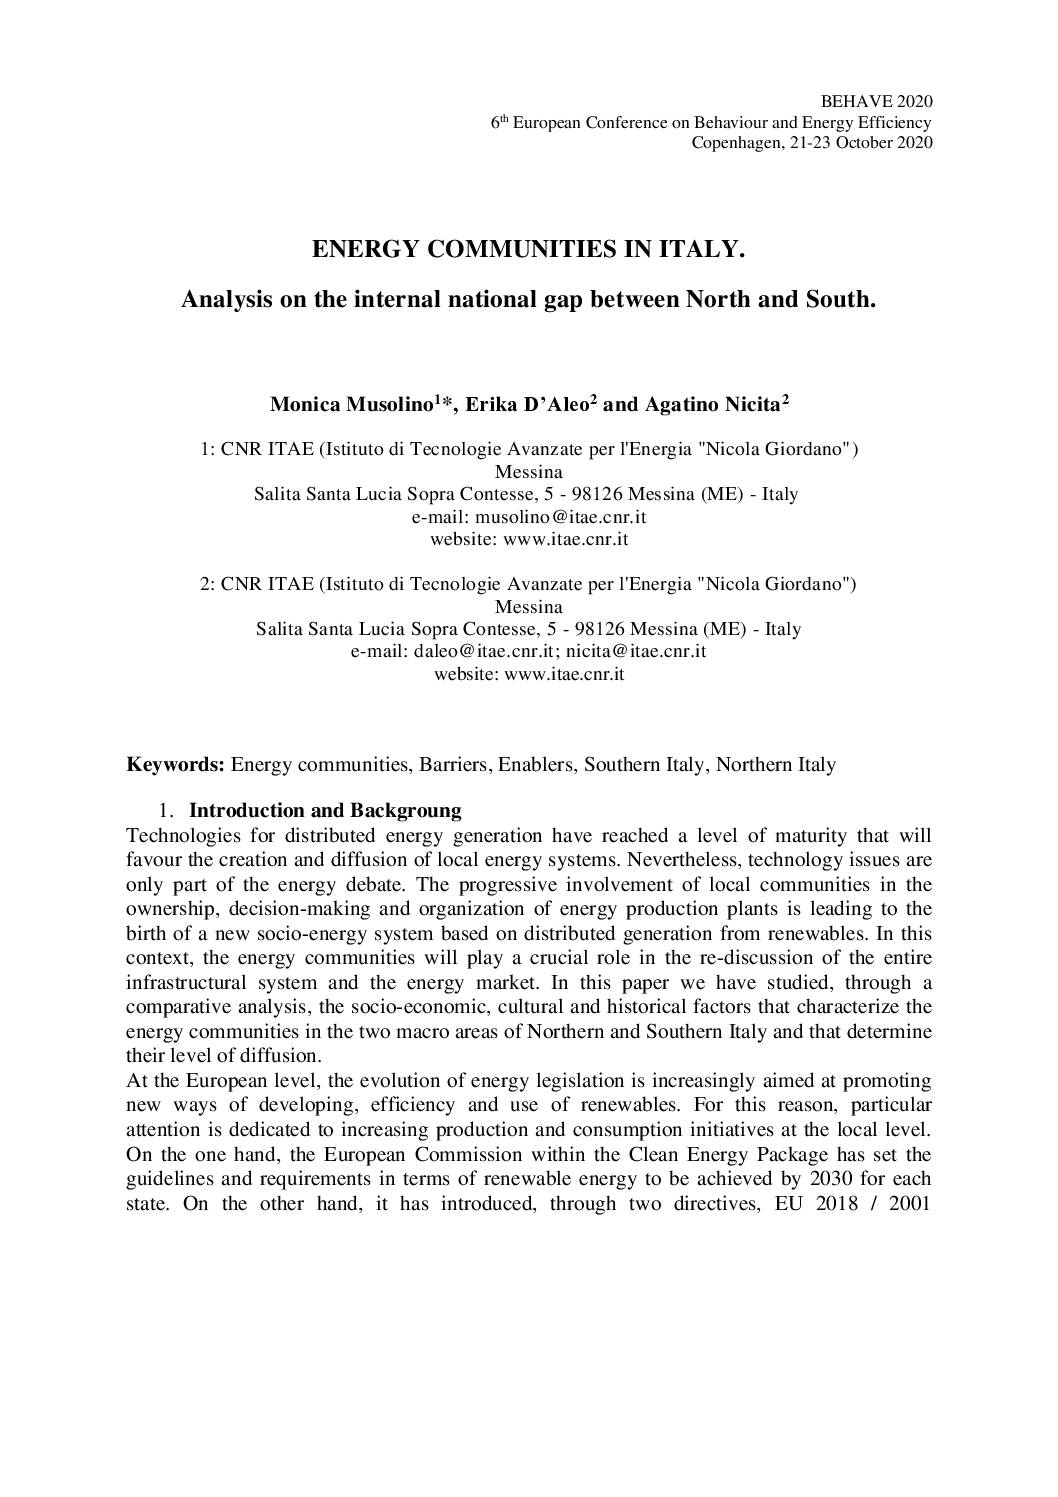 Energy Communities in Italy – Analysis on the internal gap between the North and South